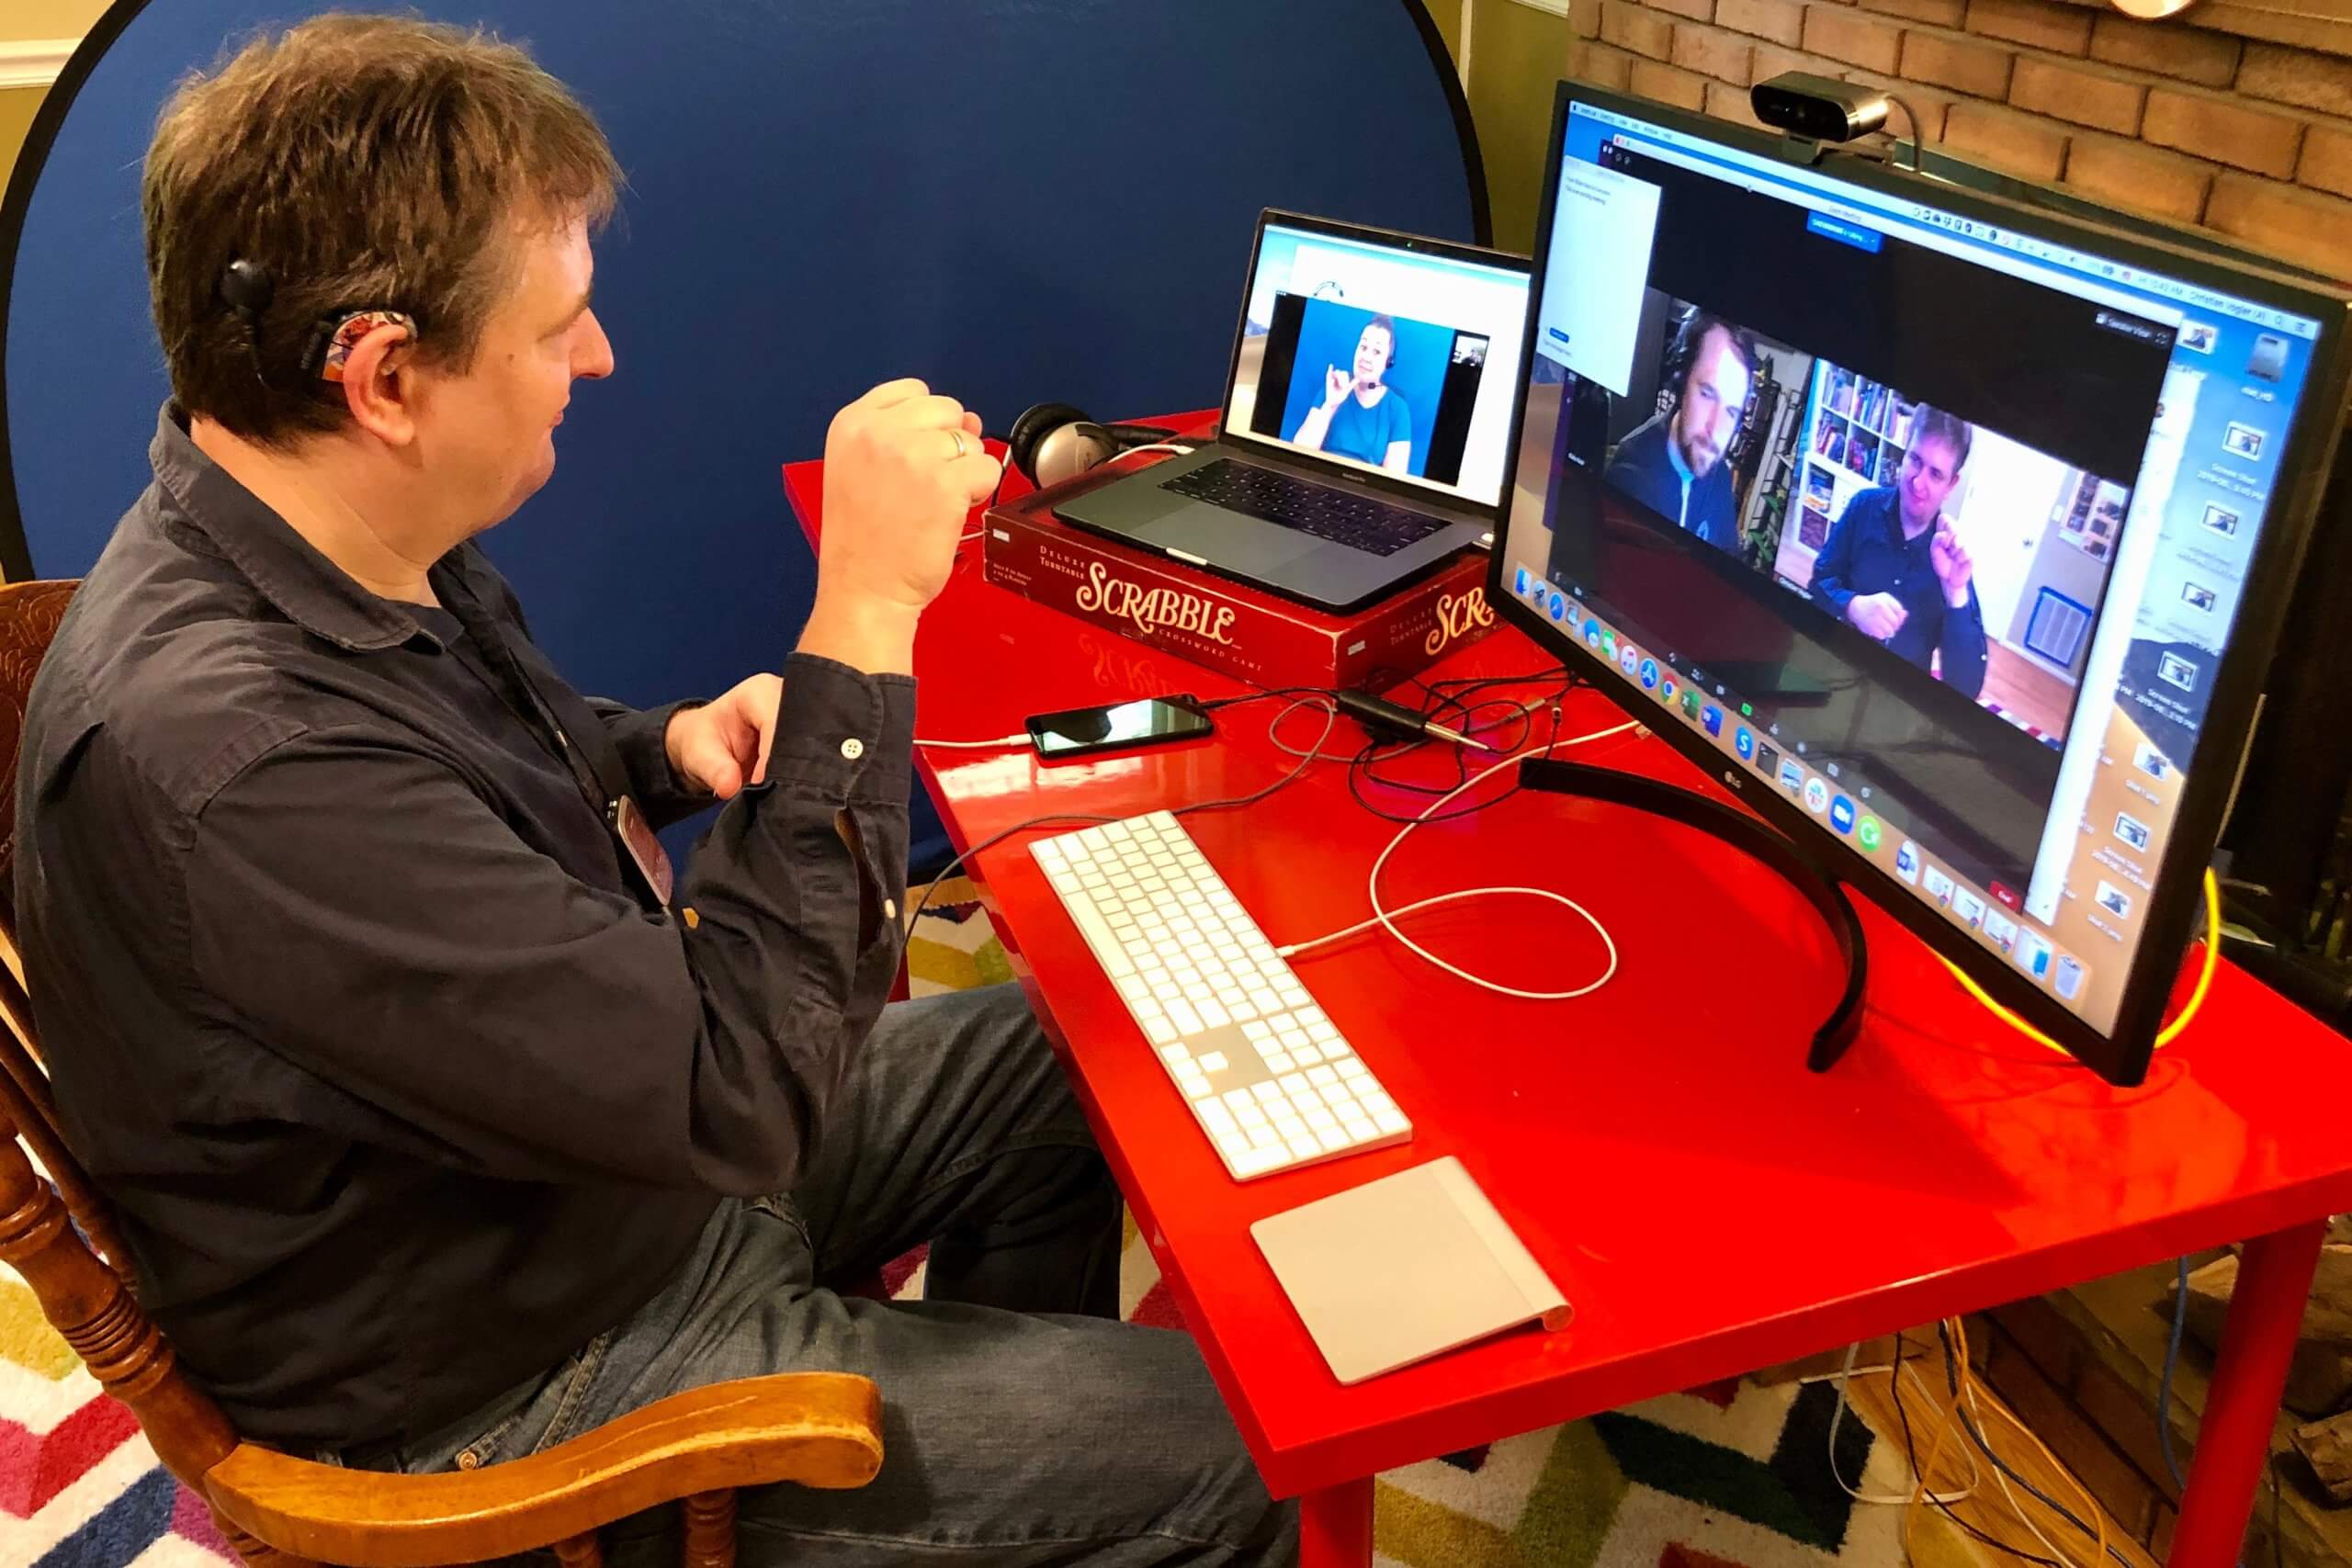 Man signing during a teleconference. He is sitting in front of a laptop and an external monitor in a home environment. A video relay service interpreter is on the laptop screen, while the videoconference is on the external monitor.